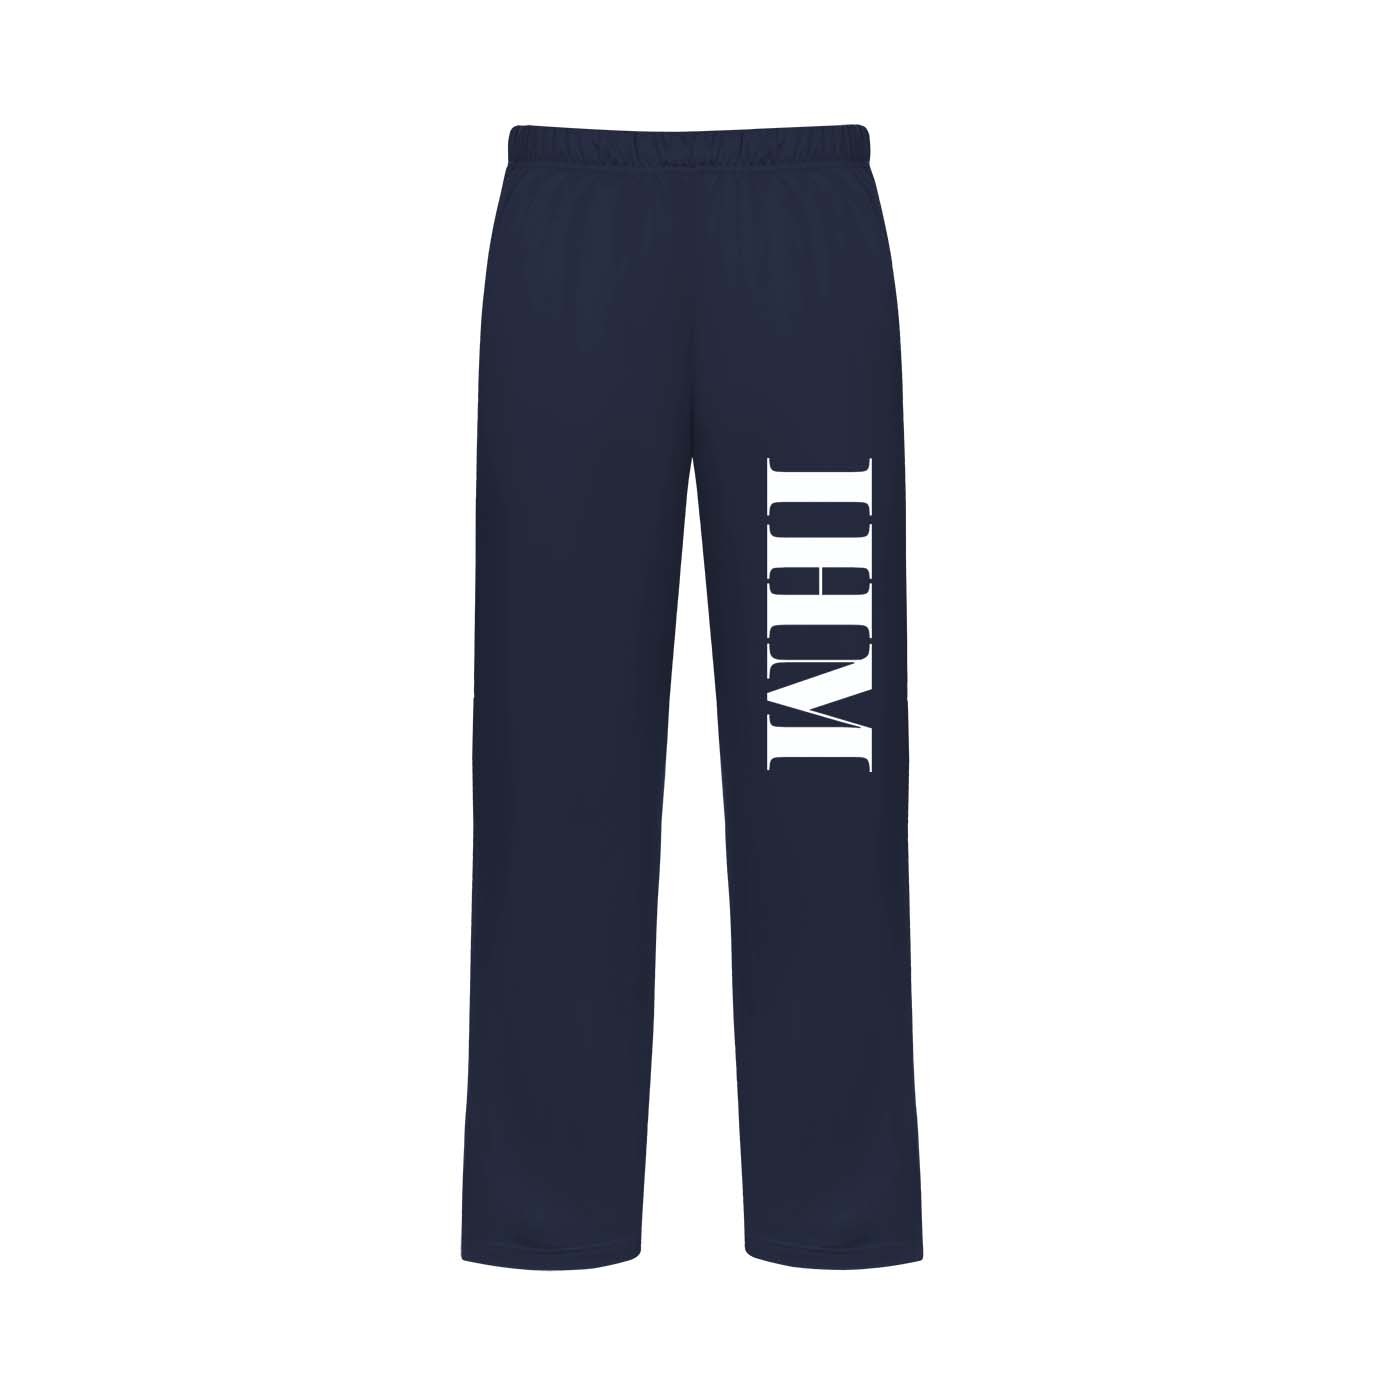 IHM Spirit Performance Open Bottom Pants w/ White IHM Logo - Please Allow 2-3 Weeks for Delivery